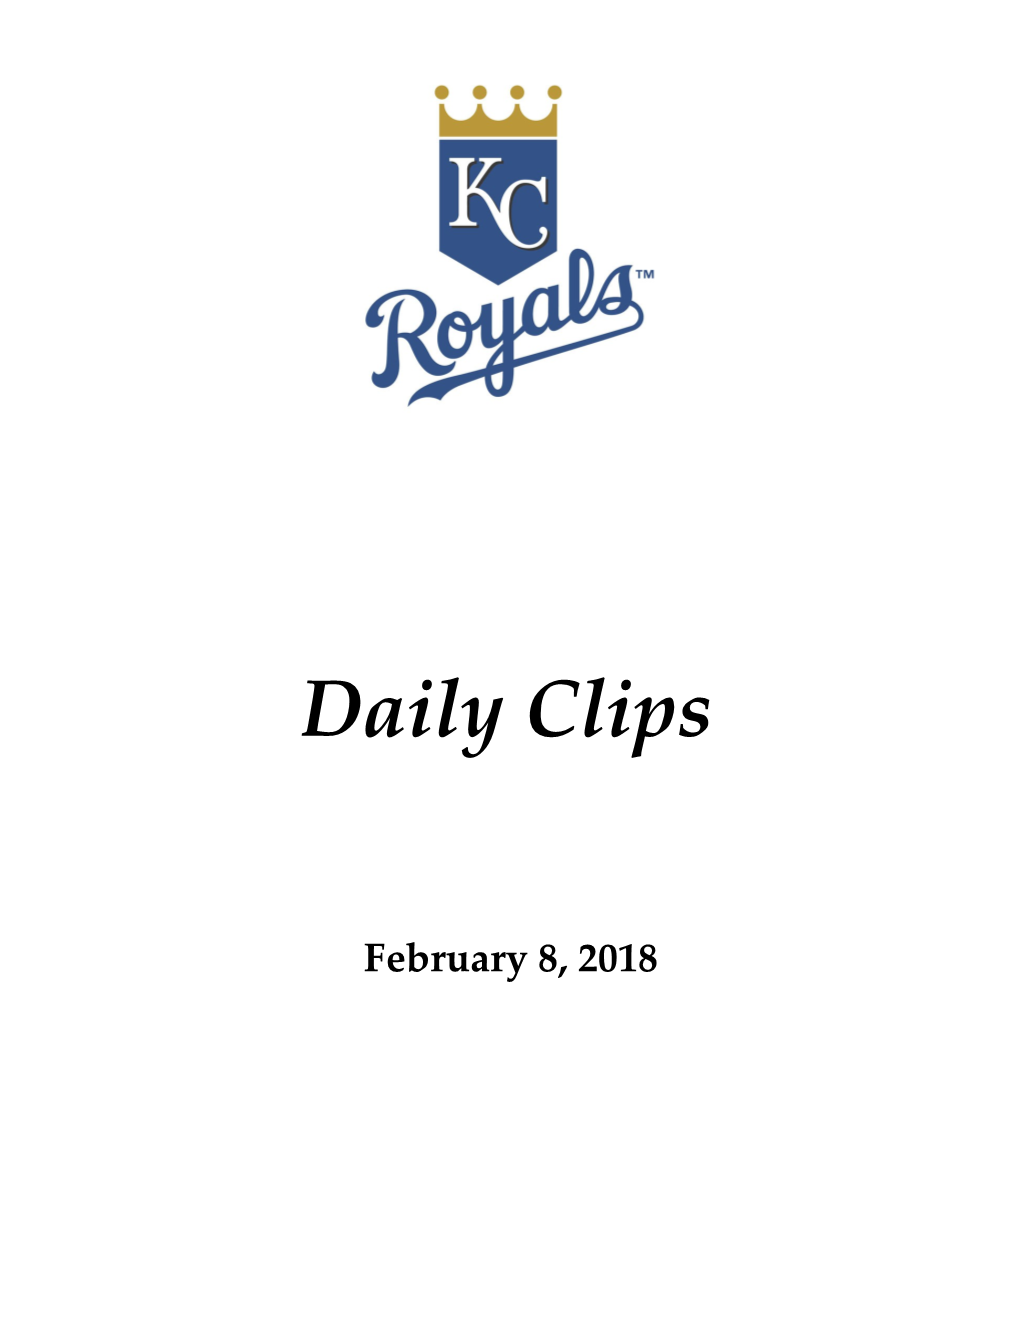 First for Royals Is Solving 1B Issue for '18